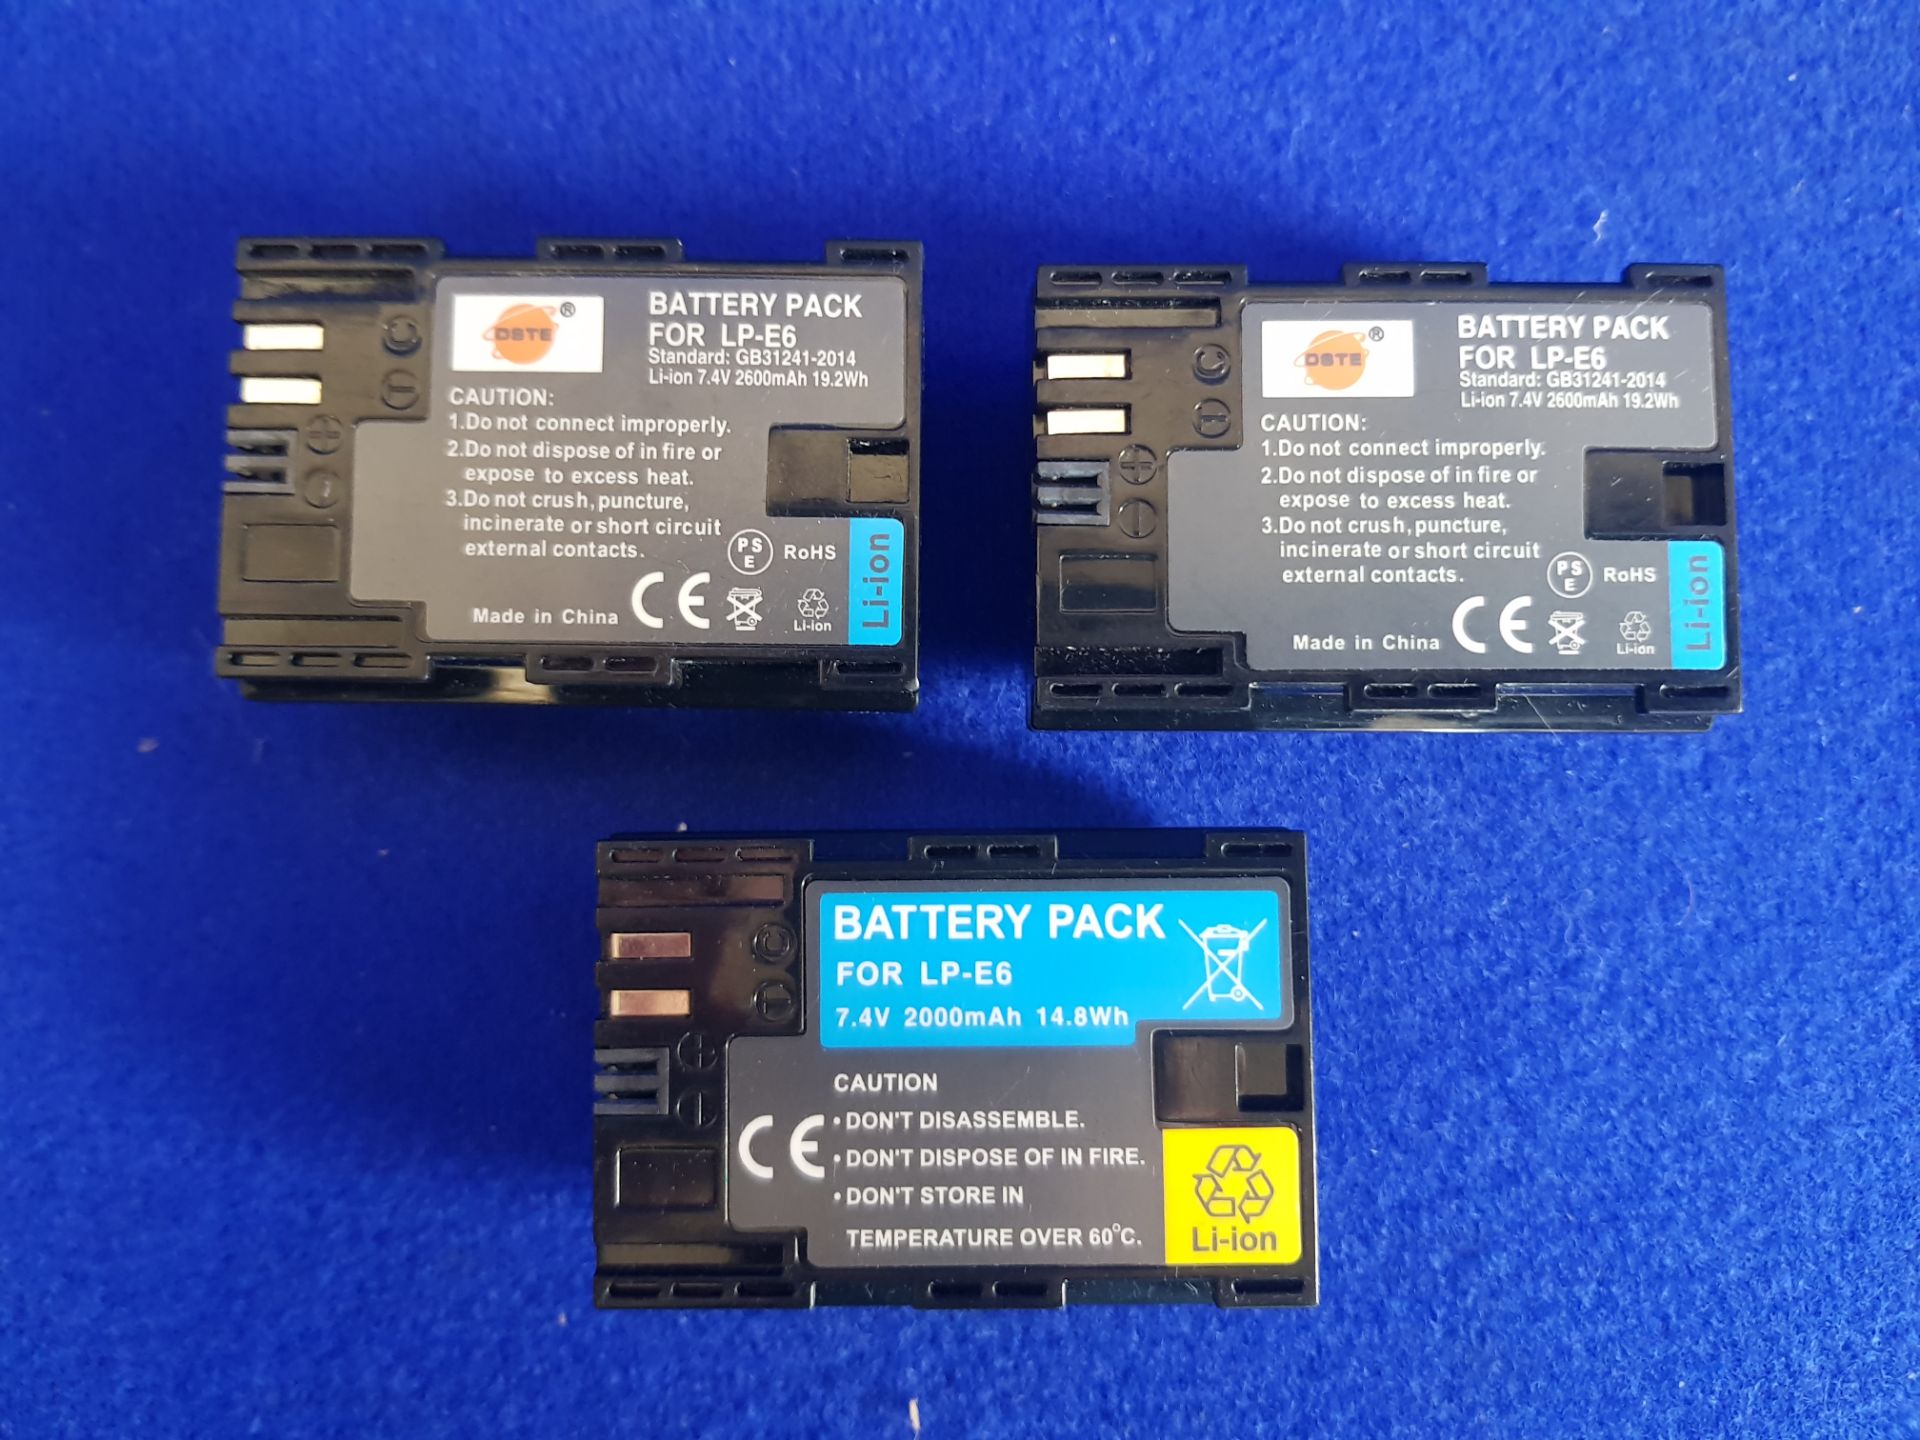 Camkix Batteries And Battery Chargers With Bag - Bild 4 aus 6